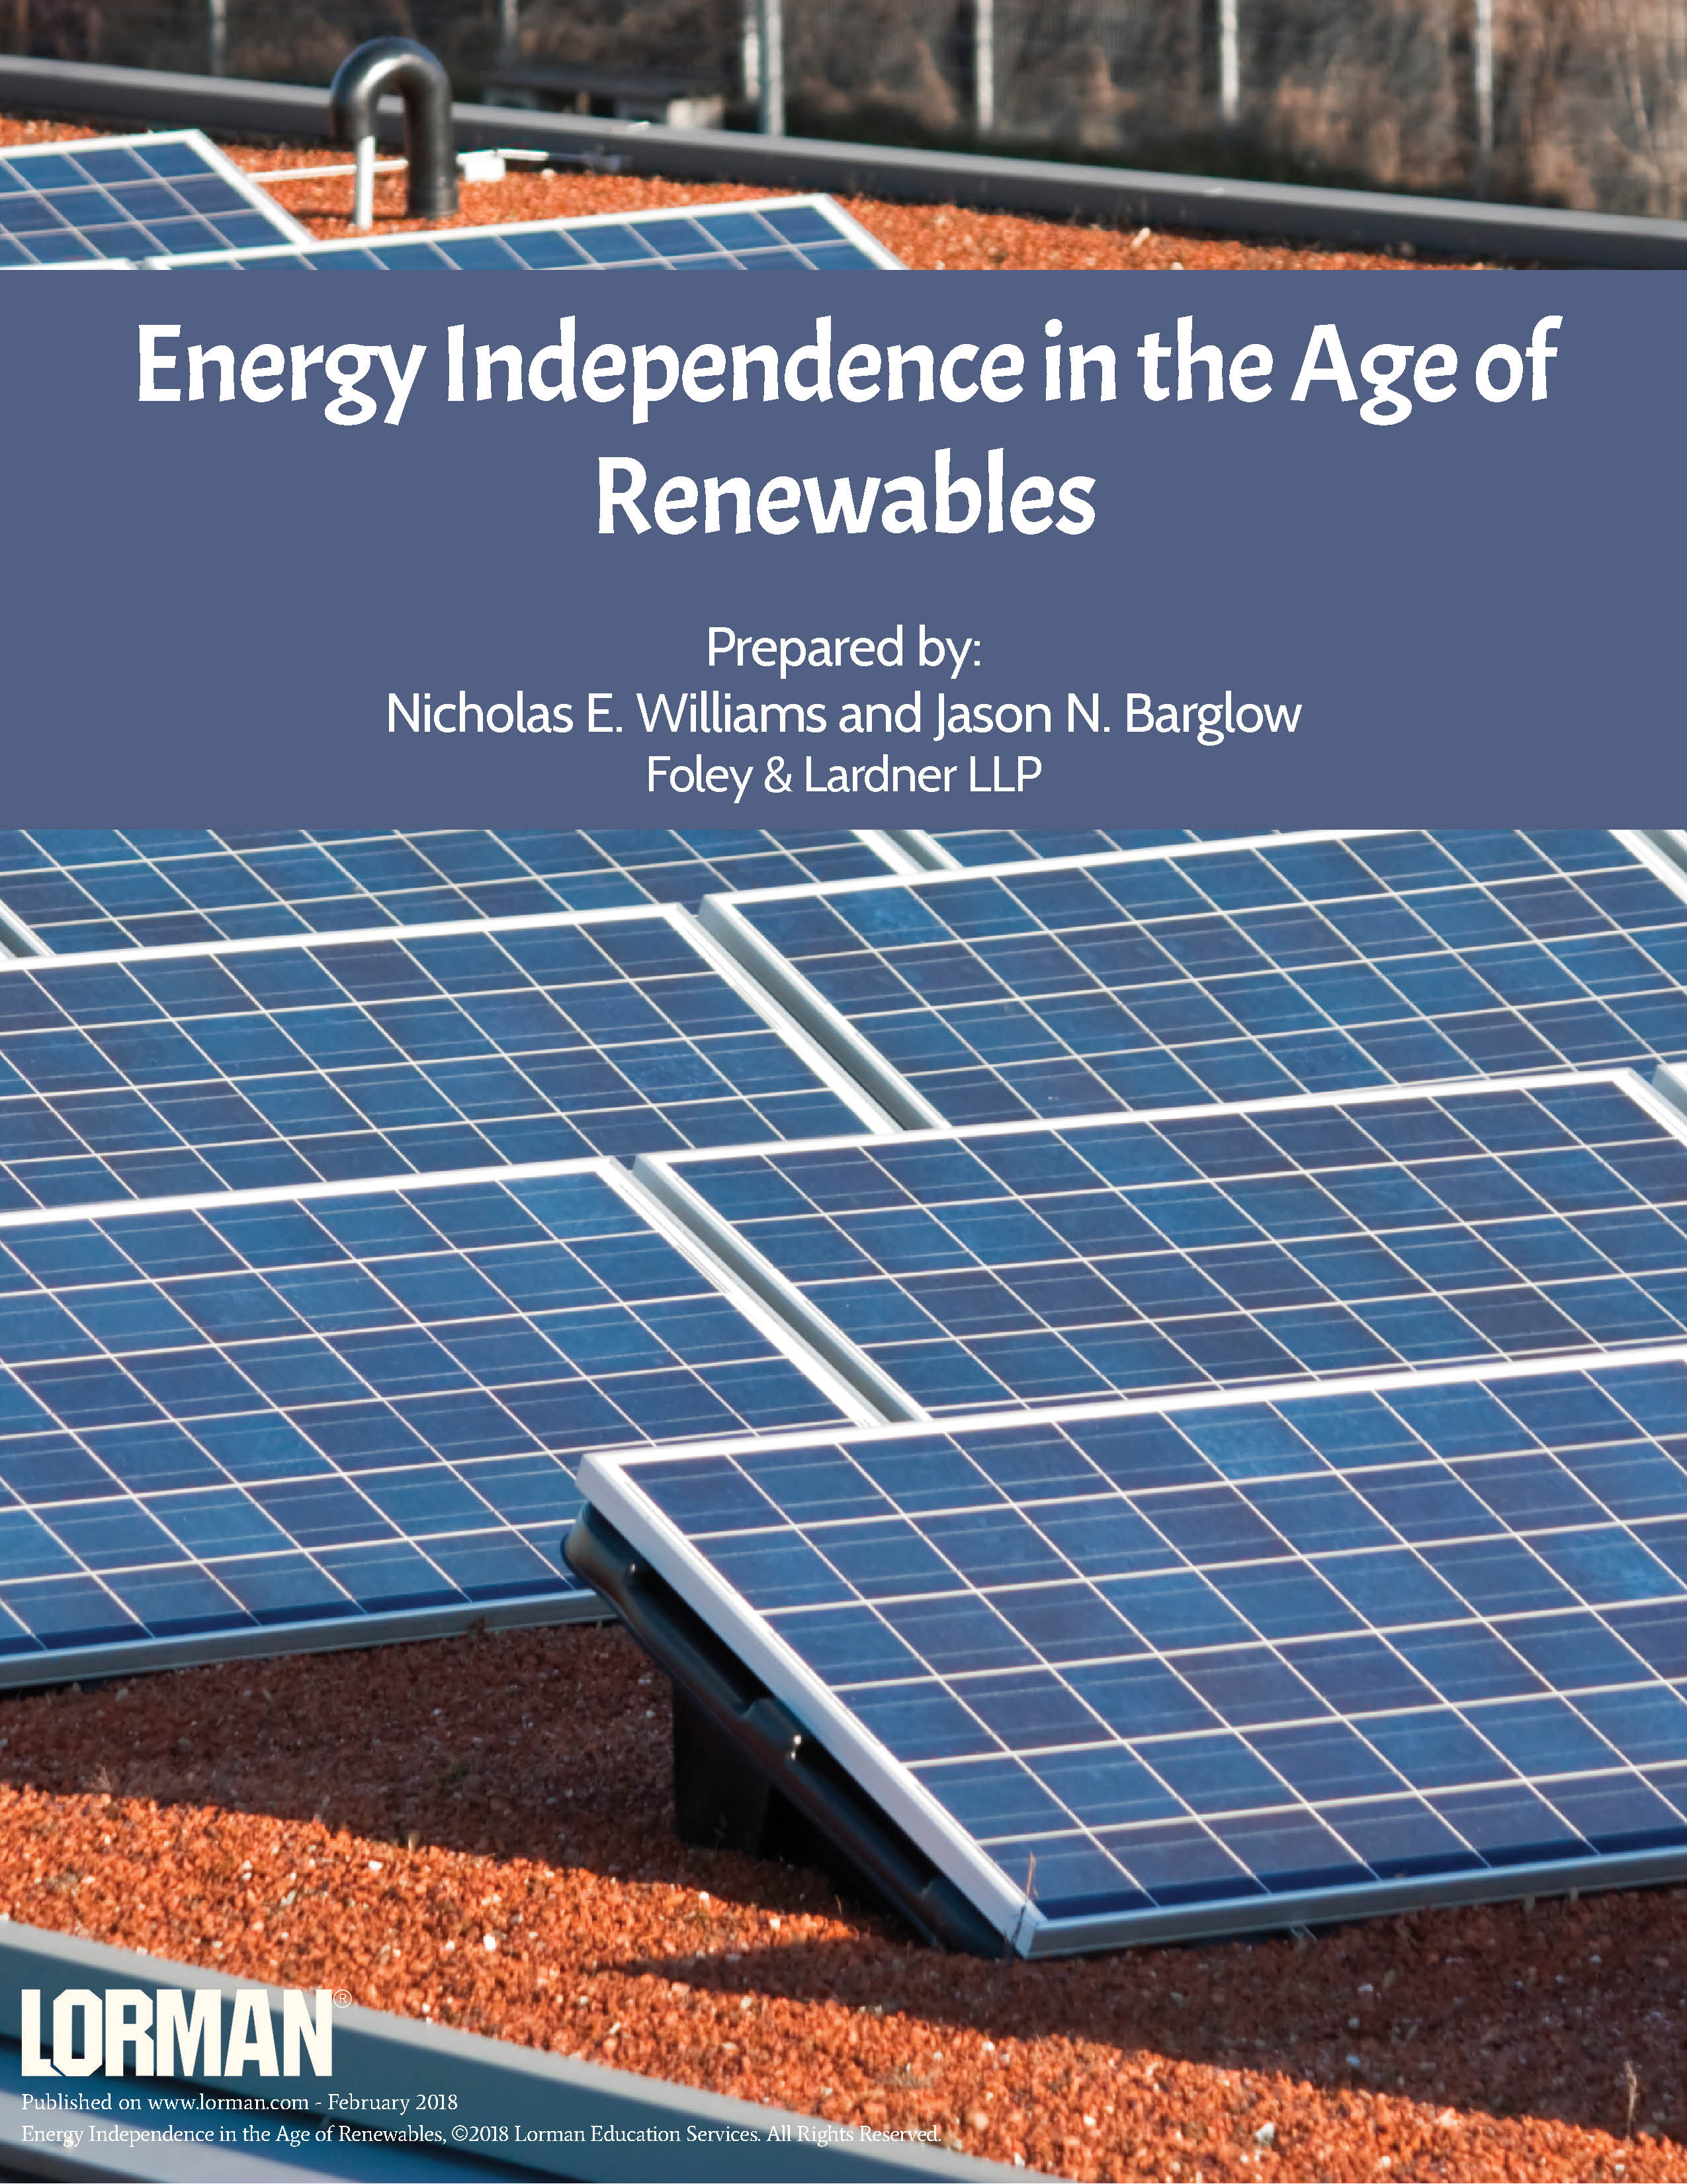 Energy Independence in the Age of Renewables